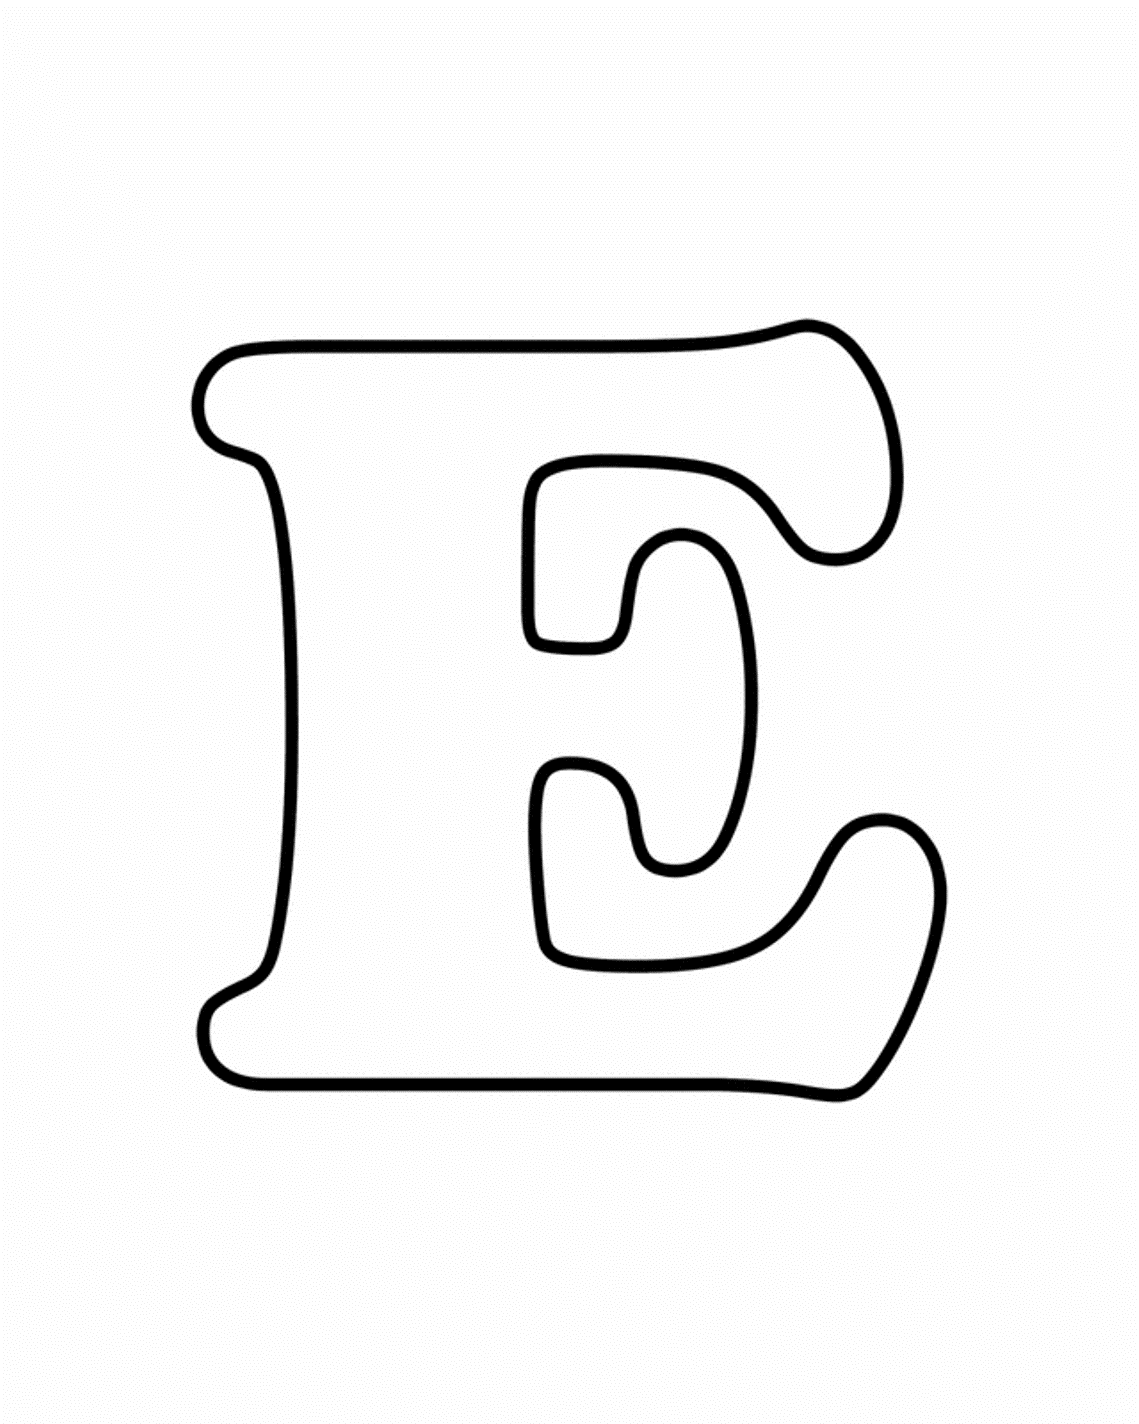 Coloring page: Alphabet (Educational) #125056 - Printable coloring pages